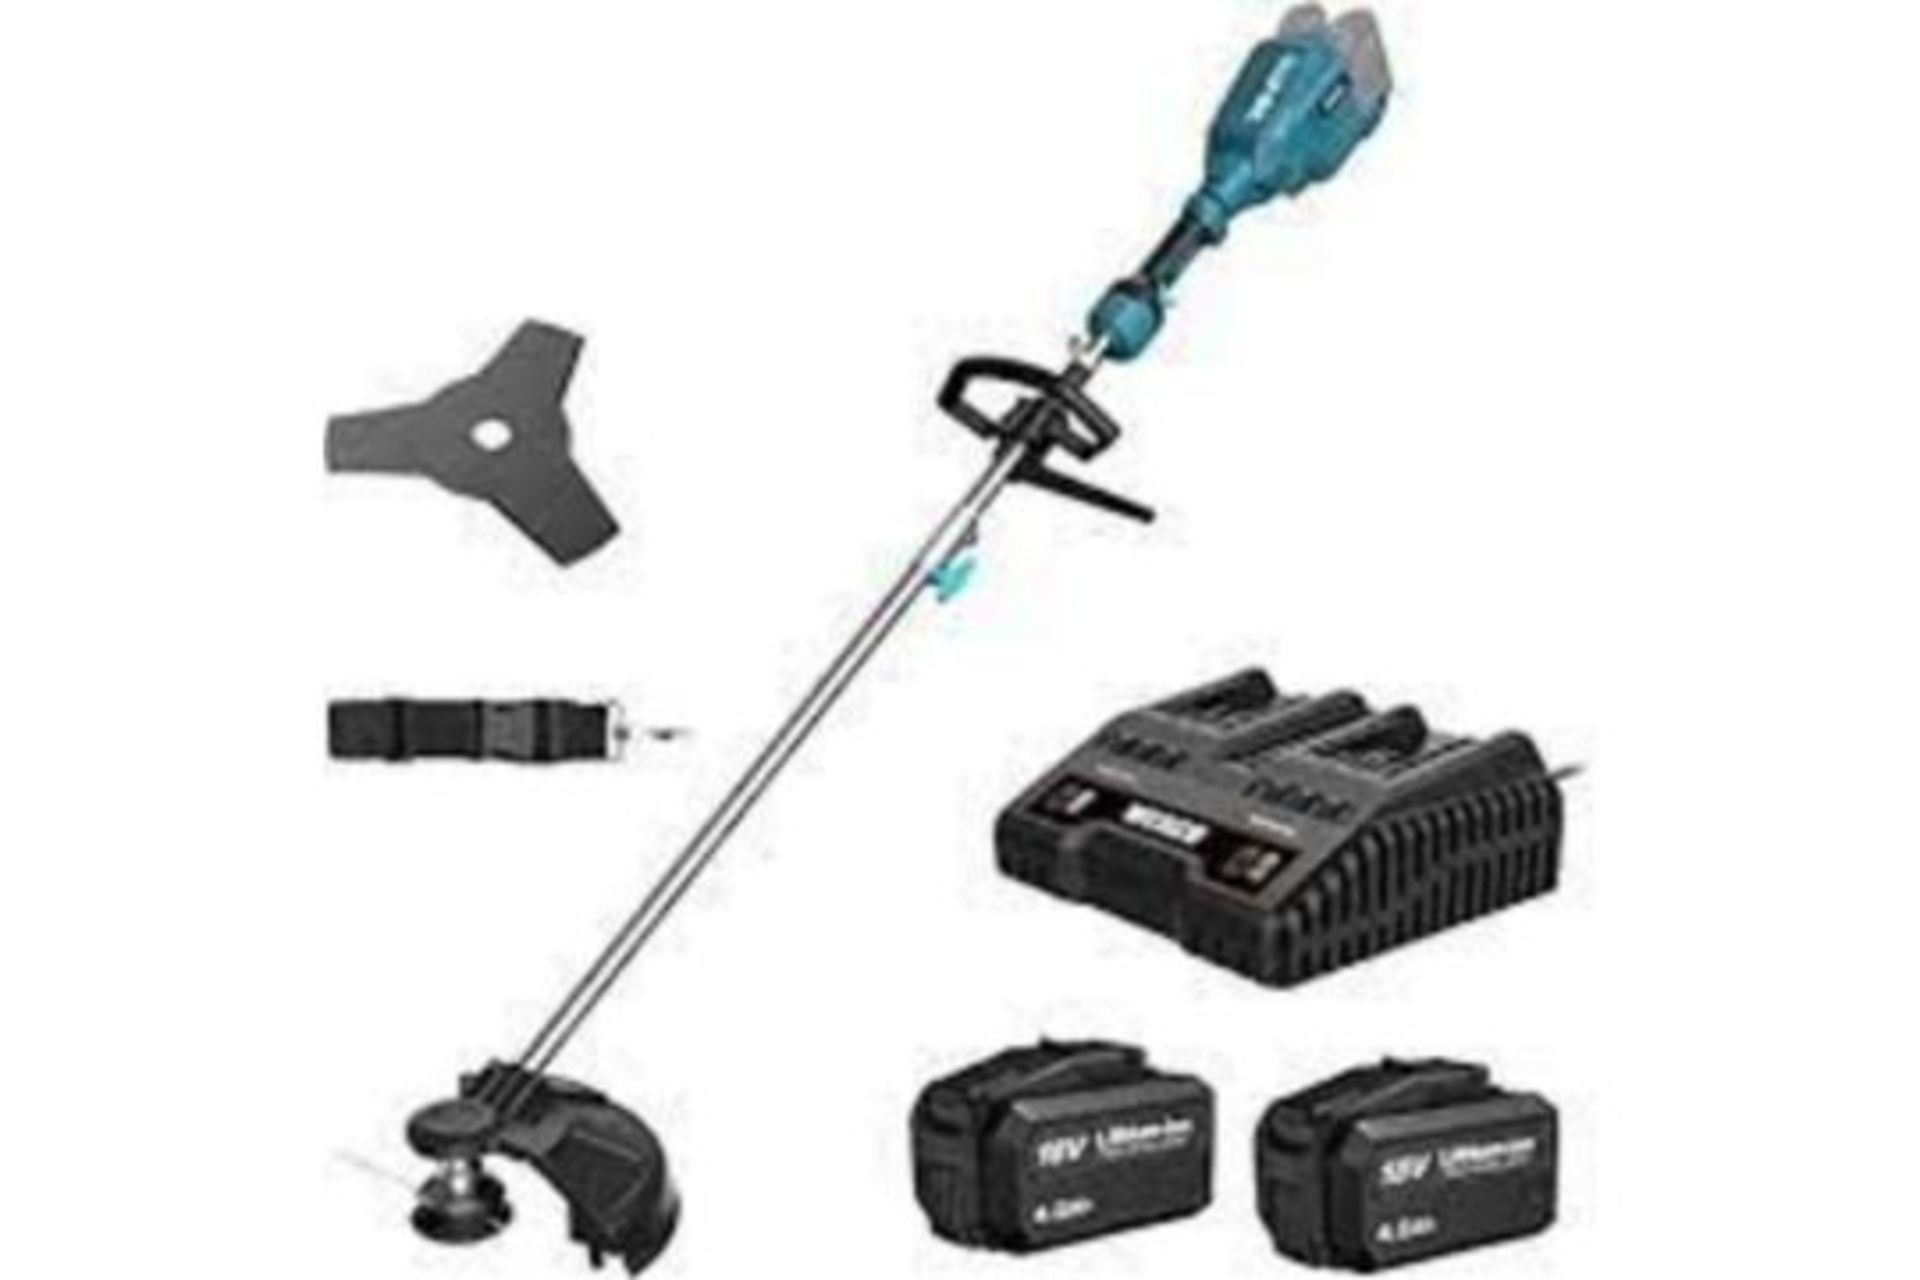 NEW BOXED WESCO 2 IN 1 BRUSH CUTTER WITH GRASS TRIMMER. 18V. INCLUDES 2 X 18V BATTERIES & CHARGER.